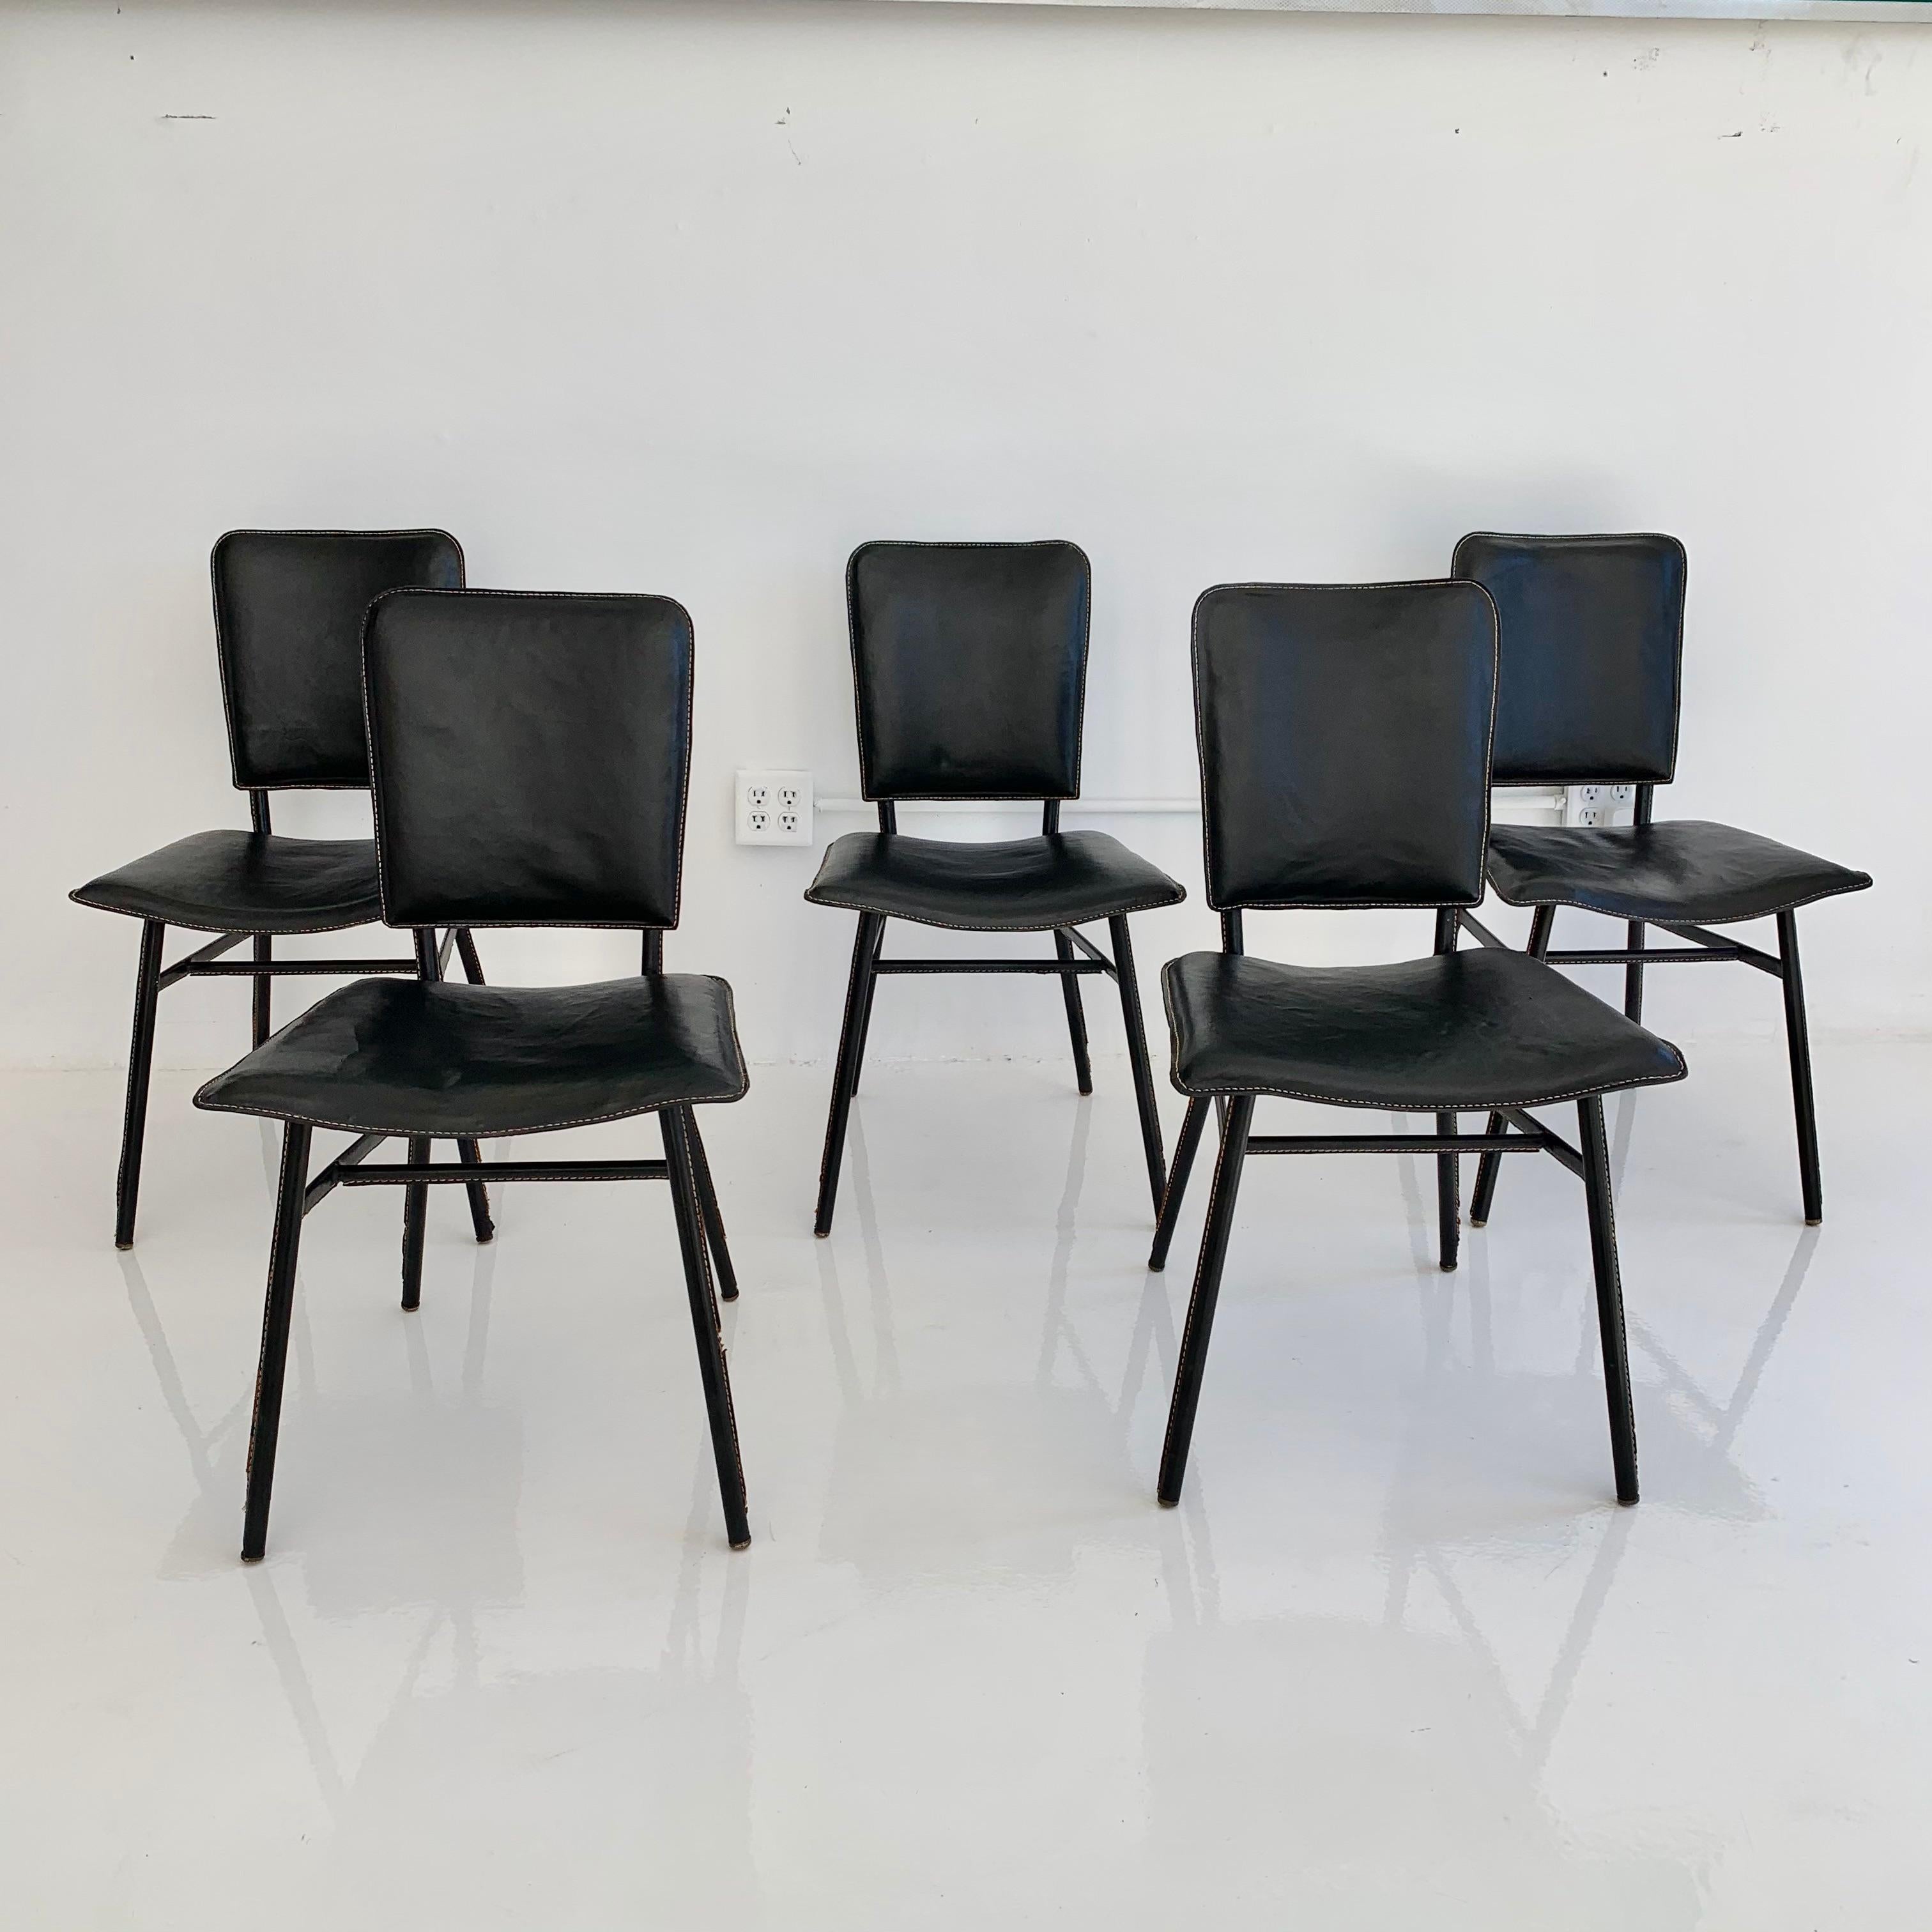 Exquisite dining table and chairs by French designer Jacques Adnet. Every piece of the table and chairs is covered in black leather. Extremely collectible set. Signature Adnet contrast stitching throughout. Very good condition. Sold as a set. Set